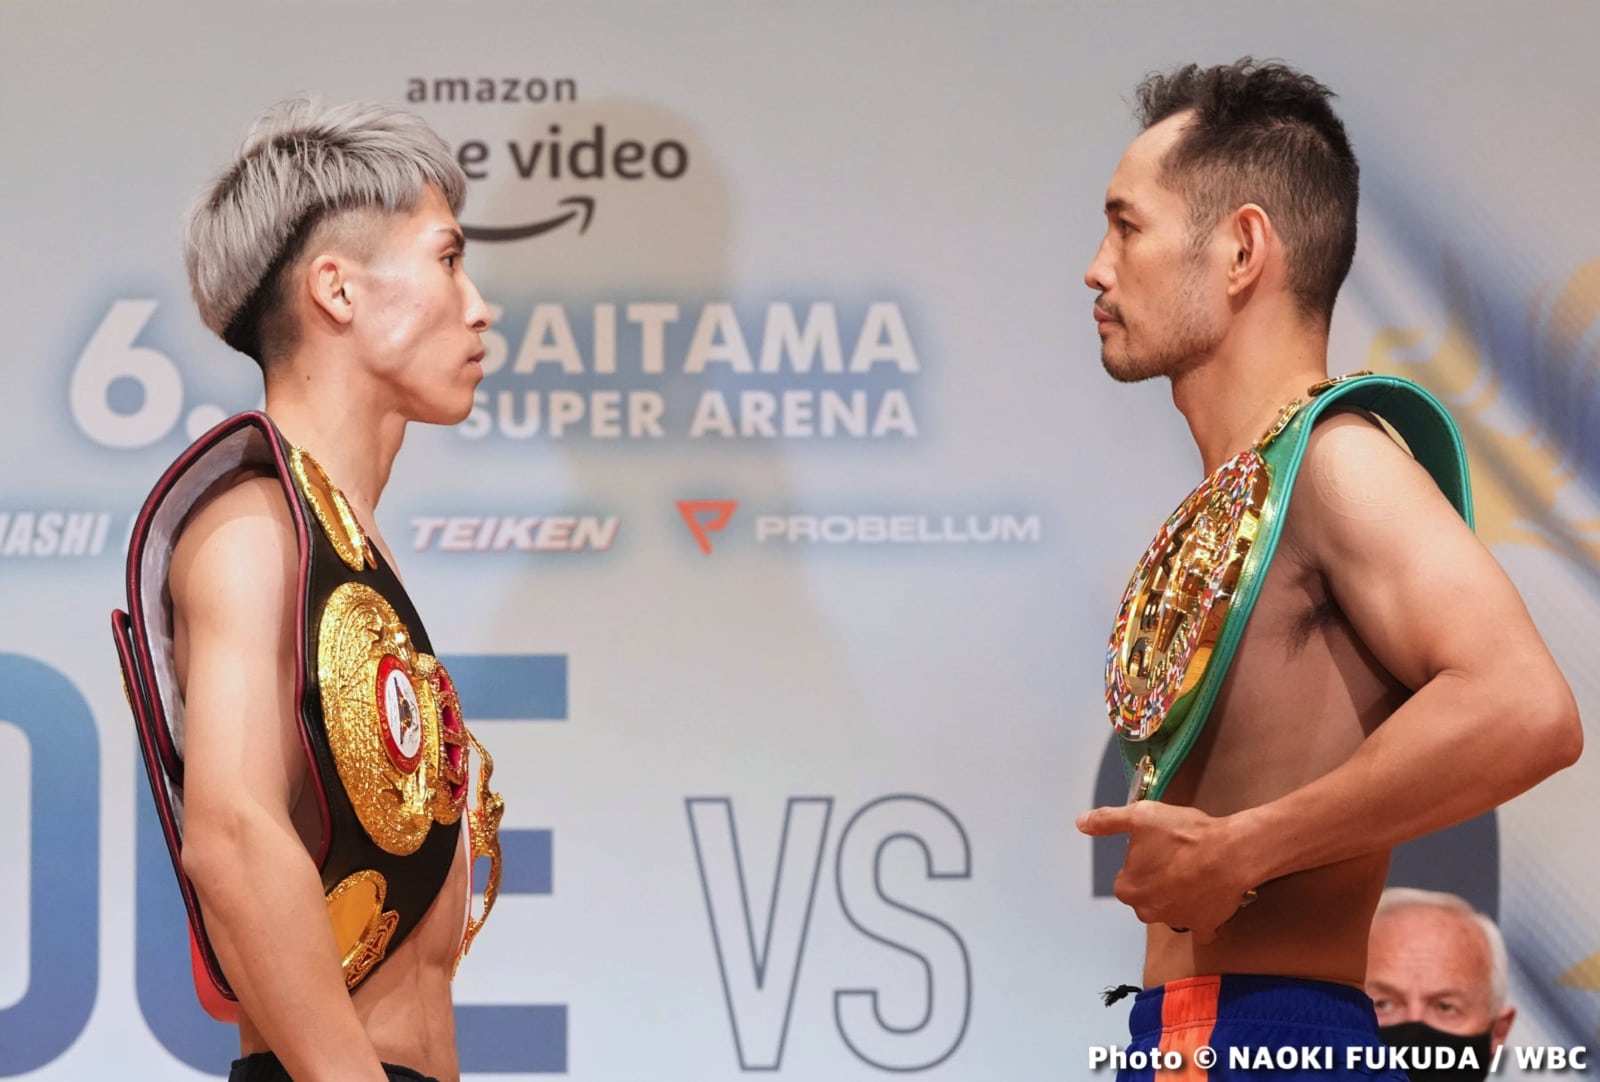 Experts On Ring Magazine Online Poll Agree – Naoya Inoue Will Defeat Nonito Donaire Again